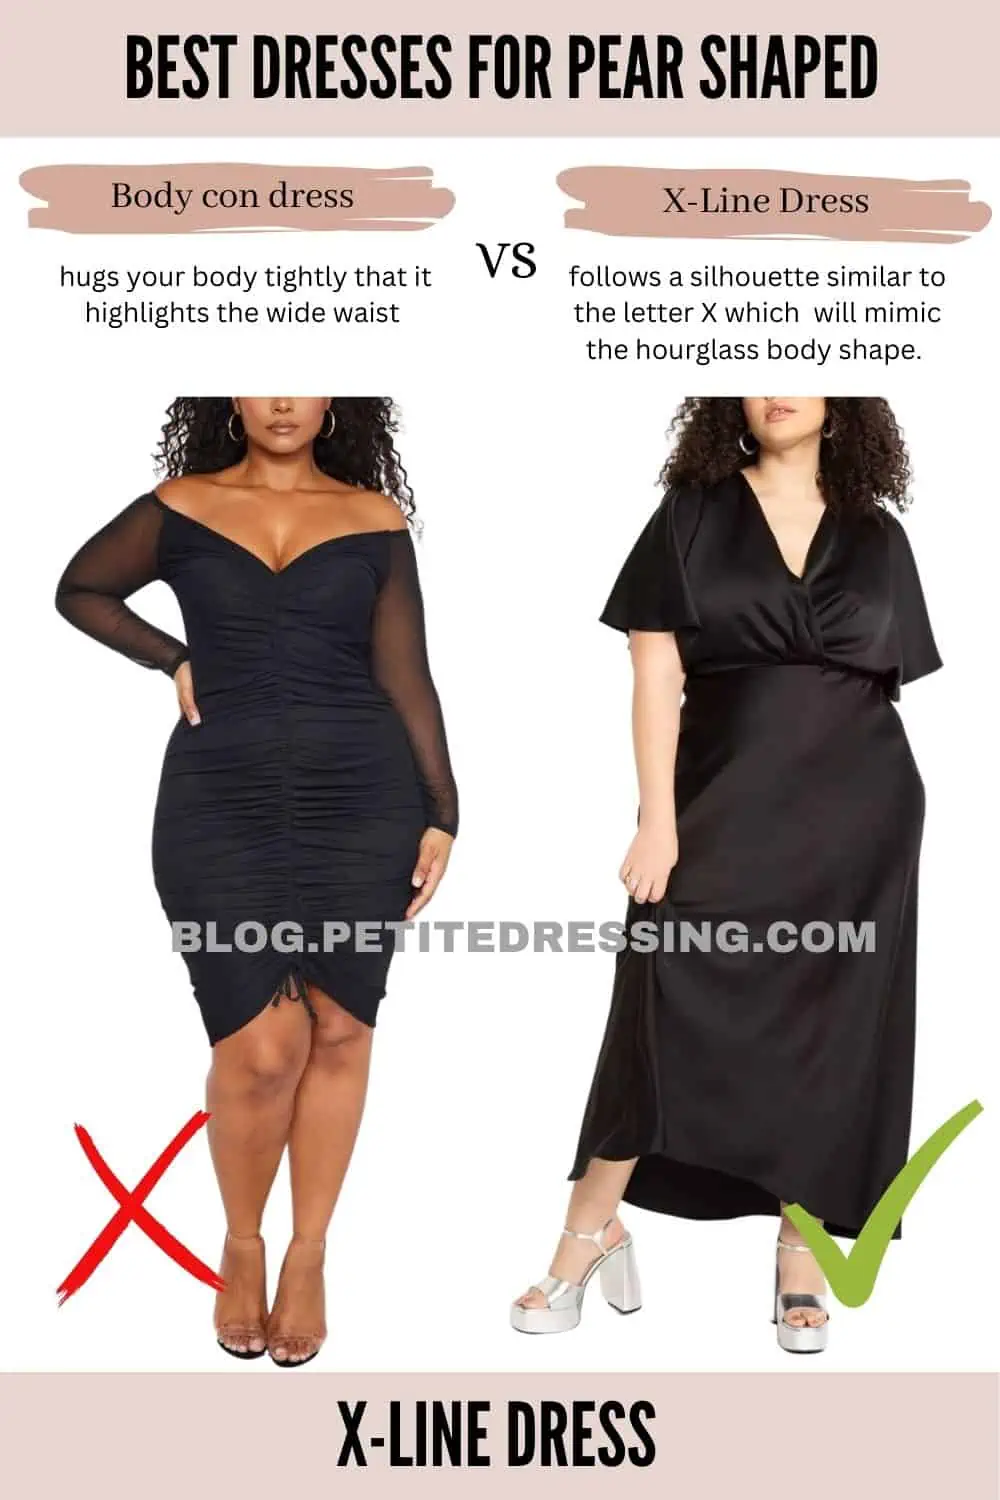 How To Dress a Pear-shaped Body